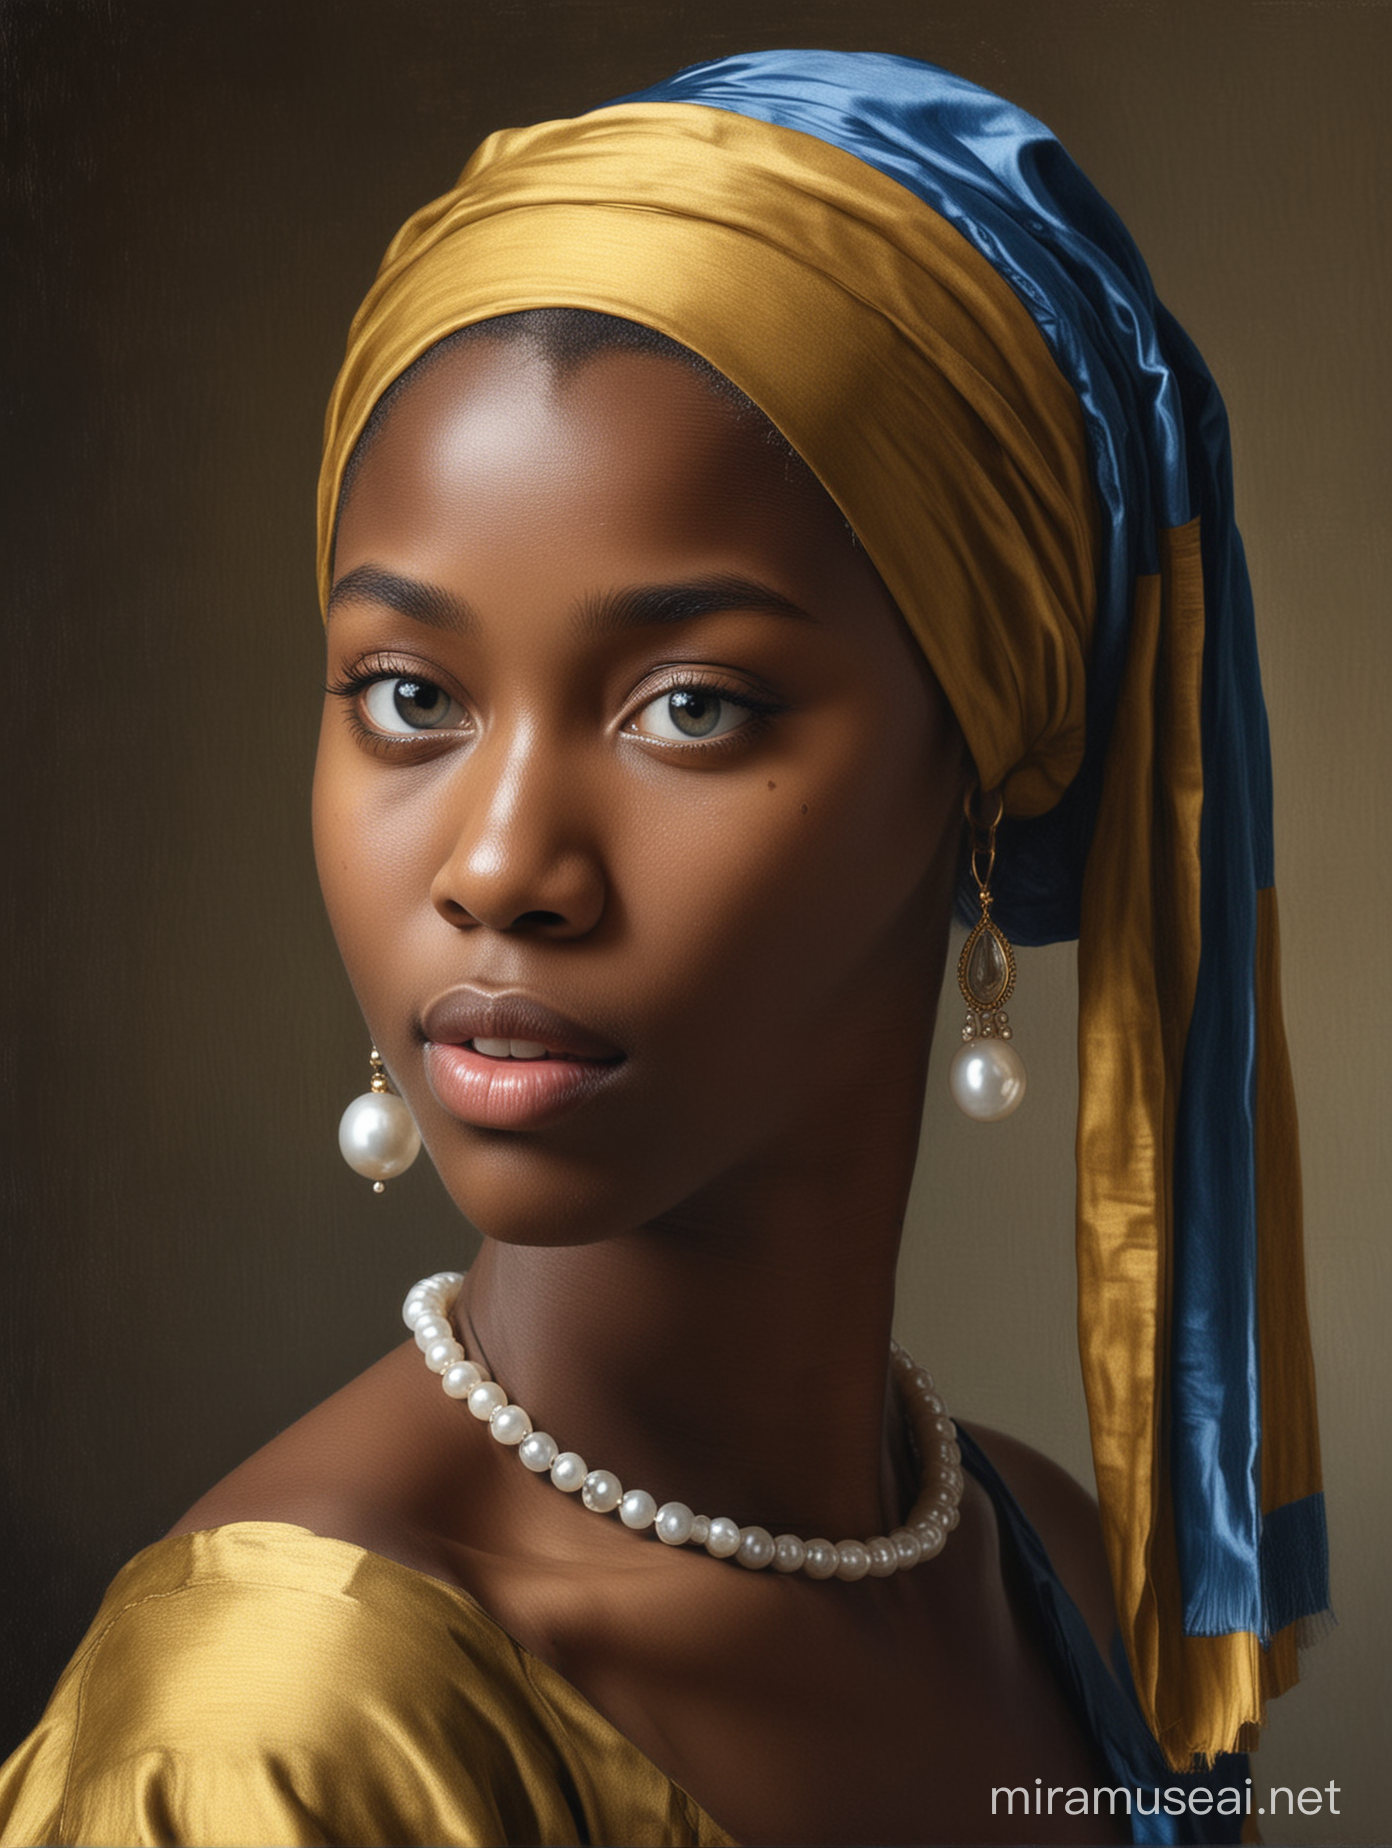 Portrait of a Young Black Woman Inspired by Girl with a Pearl Earring